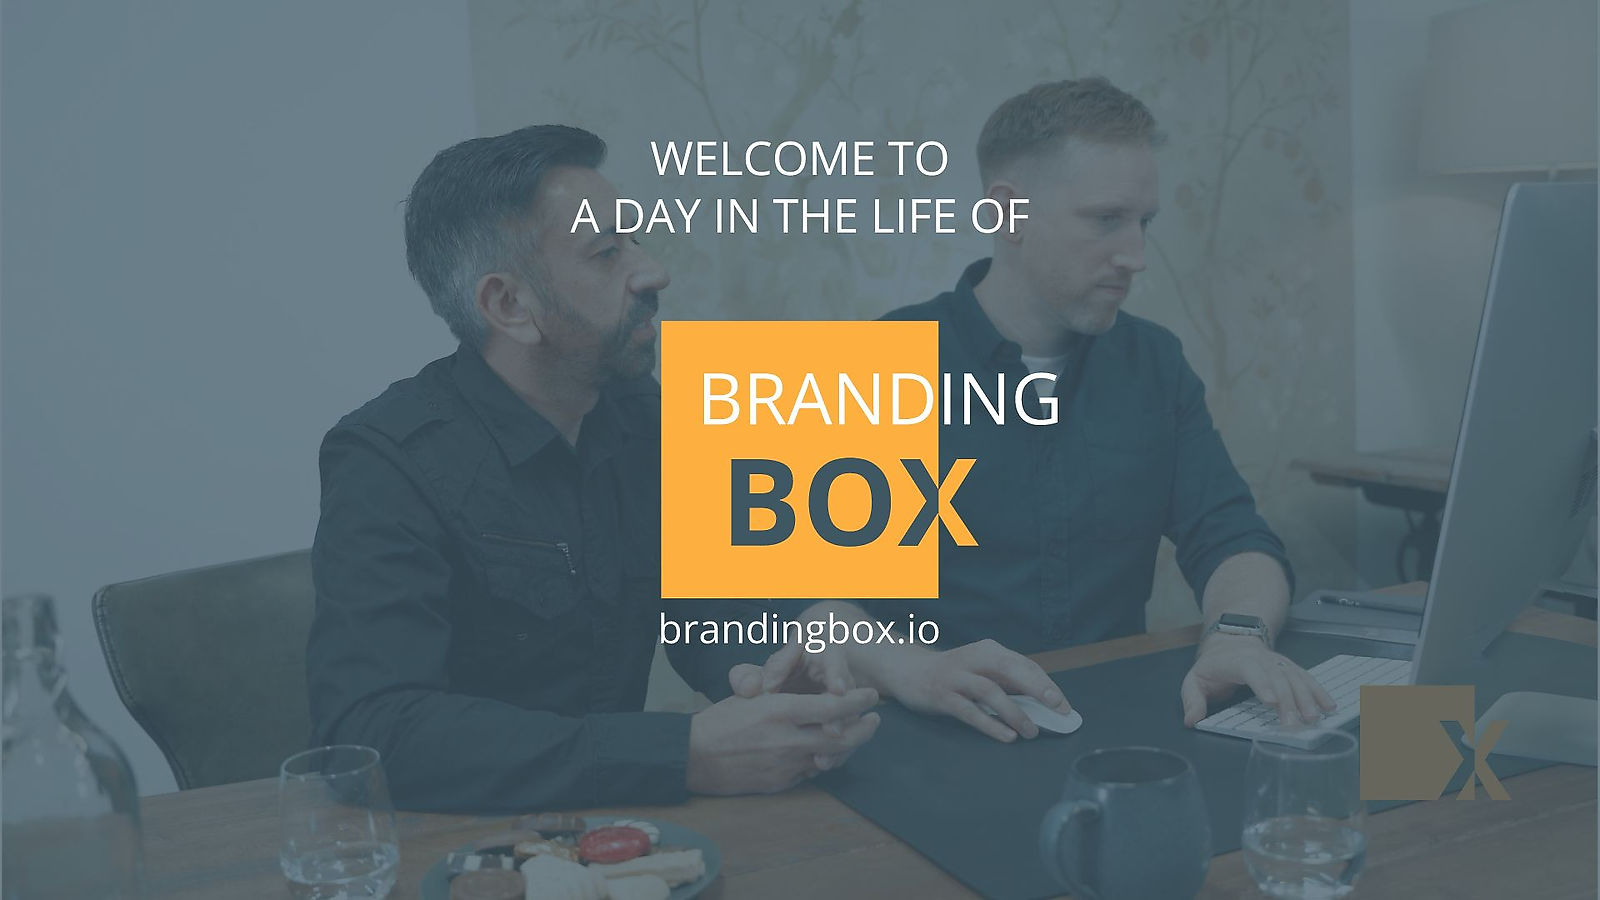 A Day in the Life of Branding Box